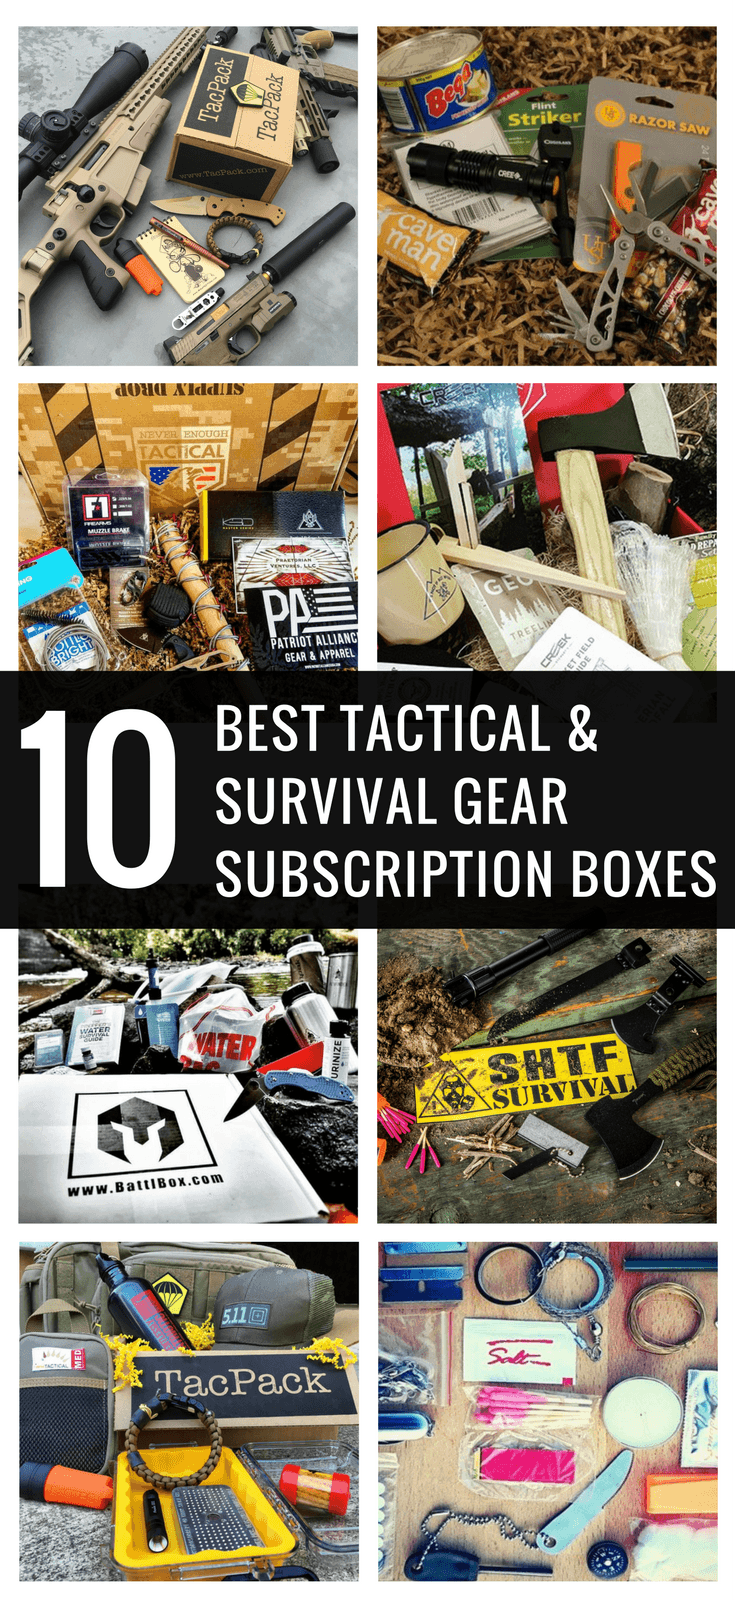 Best Tactical and Survival Gear Subscription Boxes